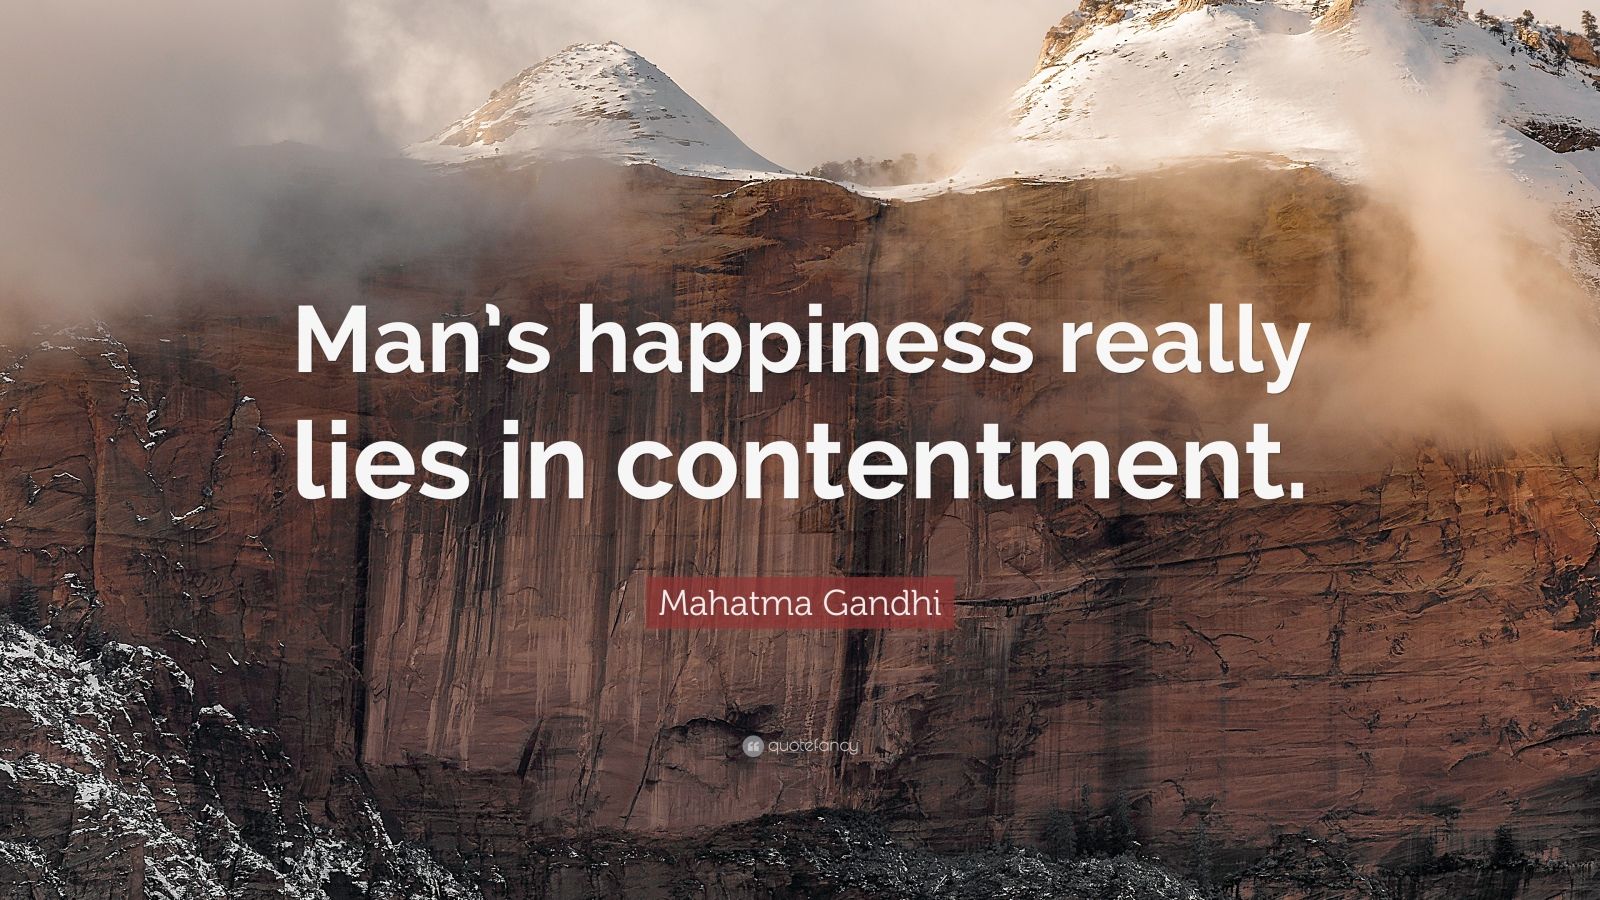 Mahatma Gandhi Quote “mans Happiness Really Lies In Contentment” 10